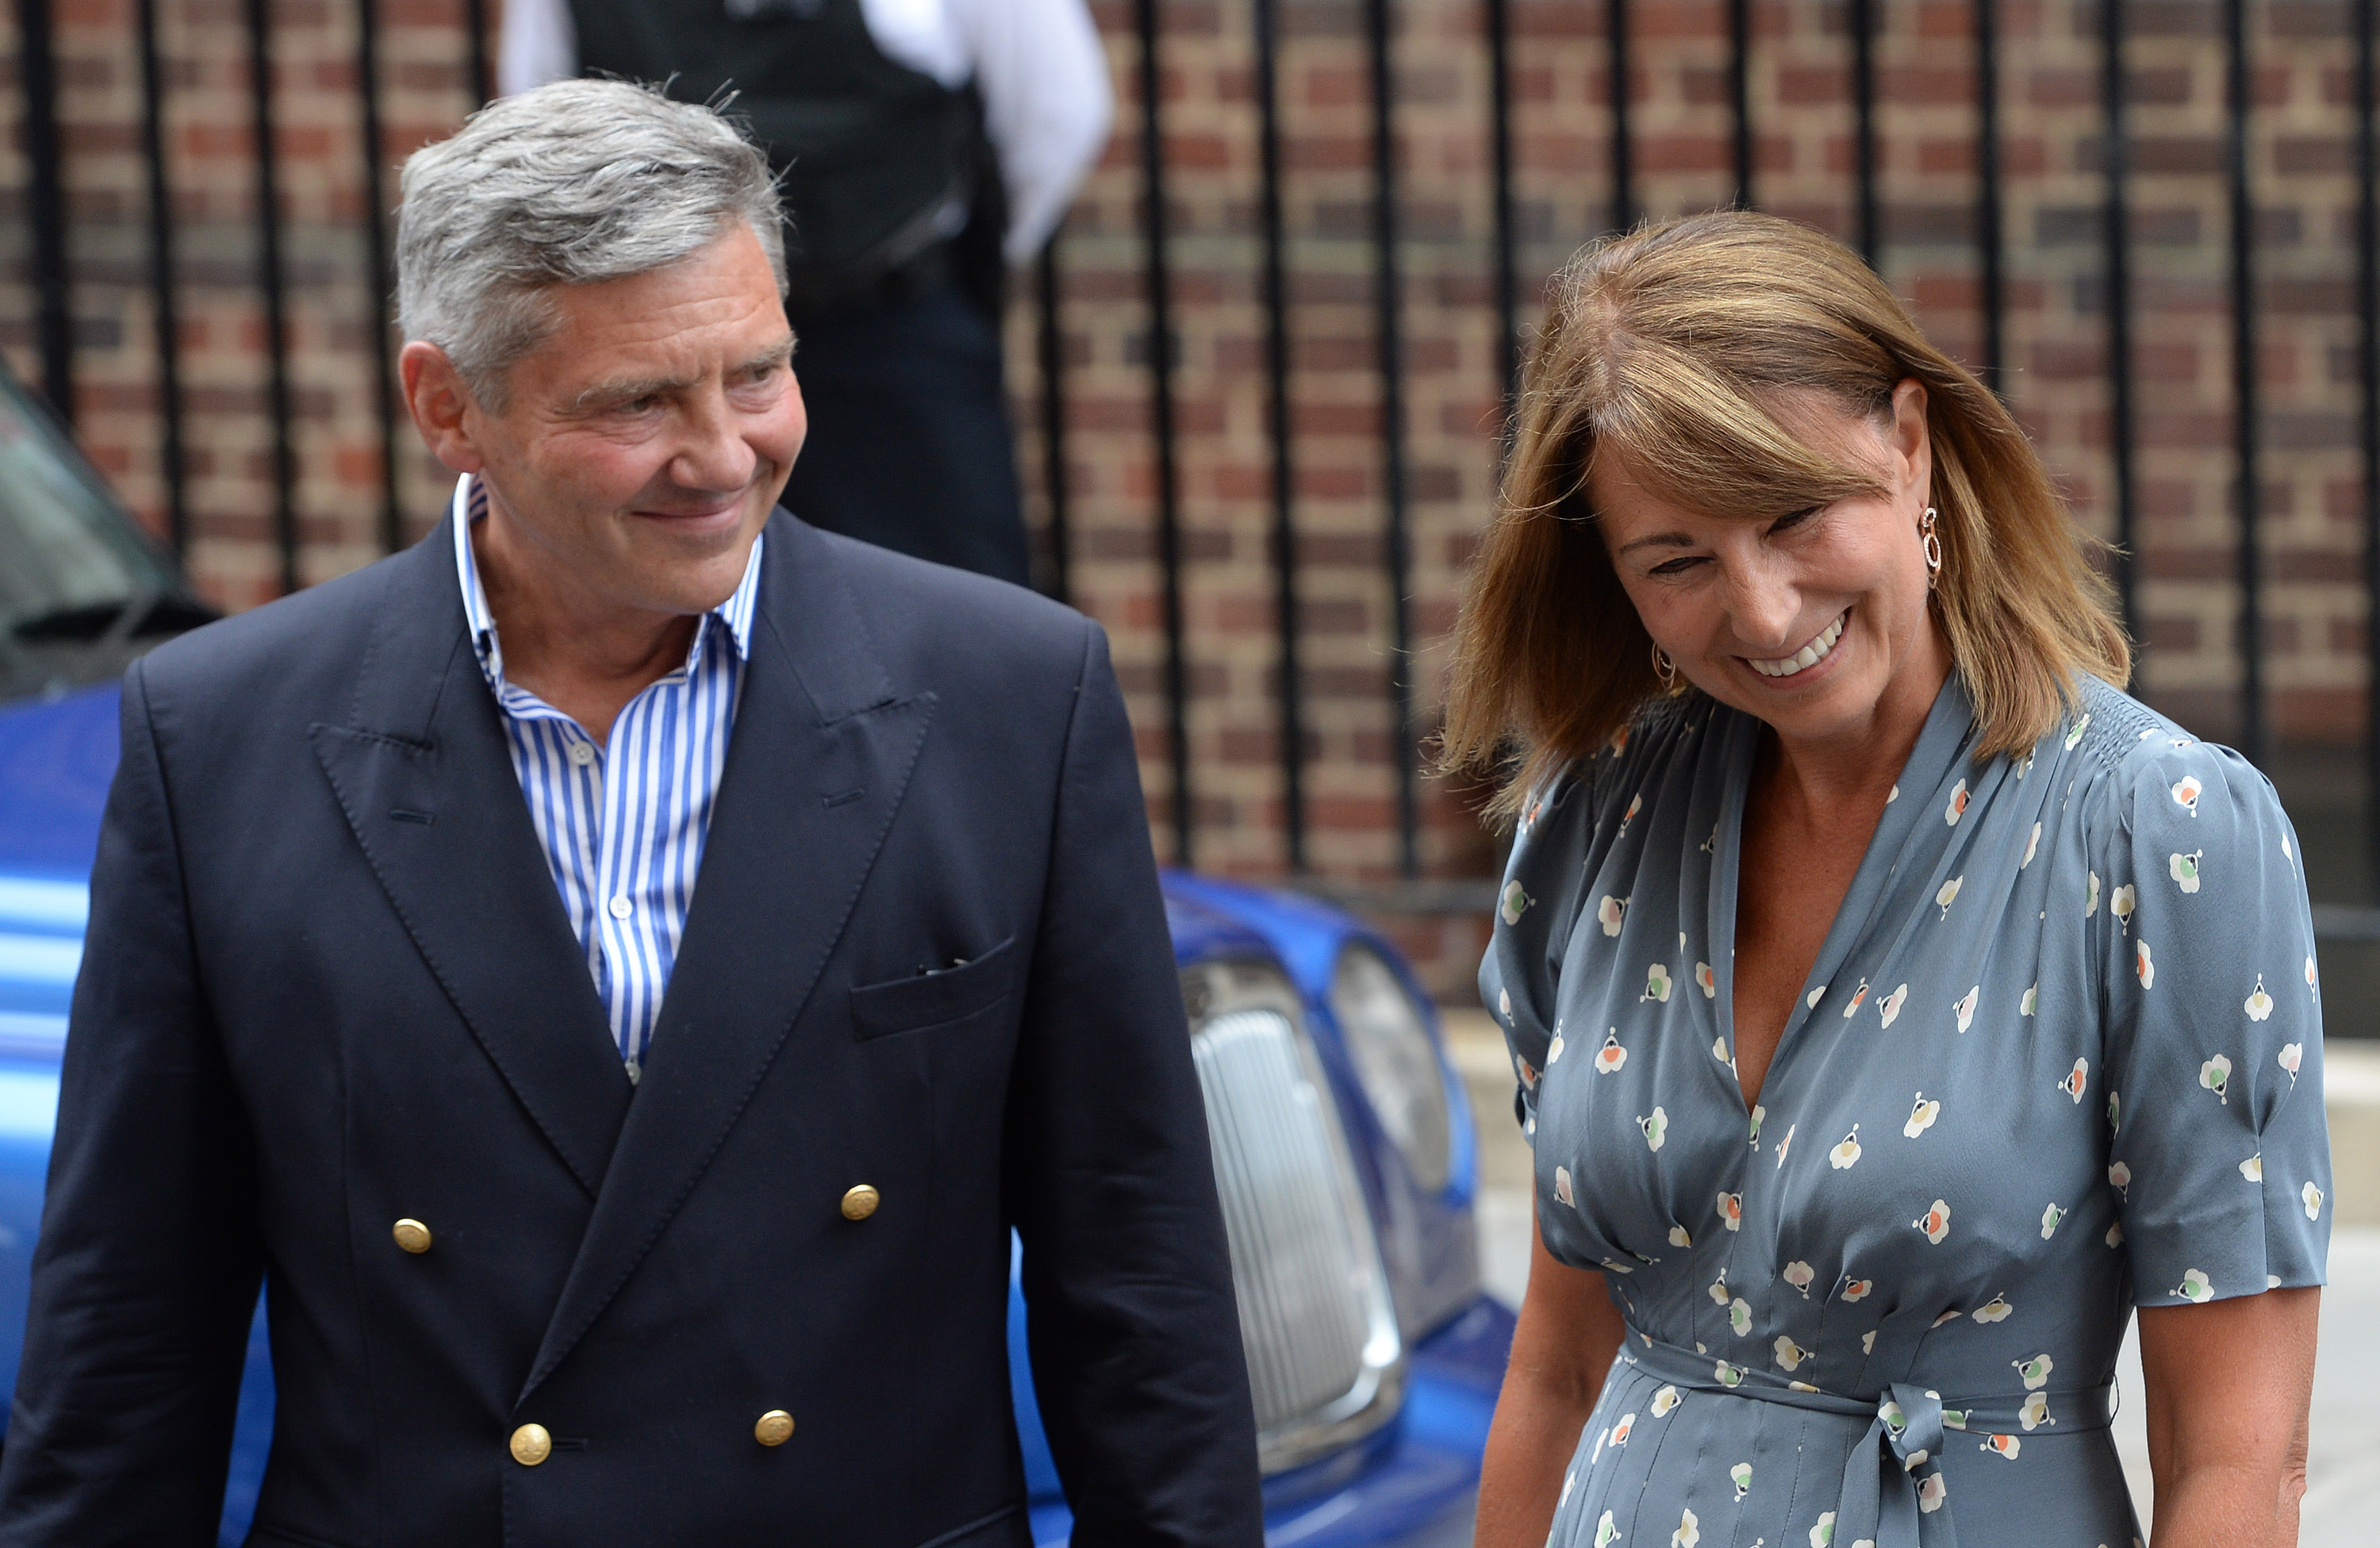 Carole Middleton and Michael Middleton arrive to see Catherine, Duchess of Cambridge and Prince William, Duke of Cambridge and their newborn son at the Lindo Wing at St Mary's Hospital in London, England, on July 23, 2013. | Source: Getty Images